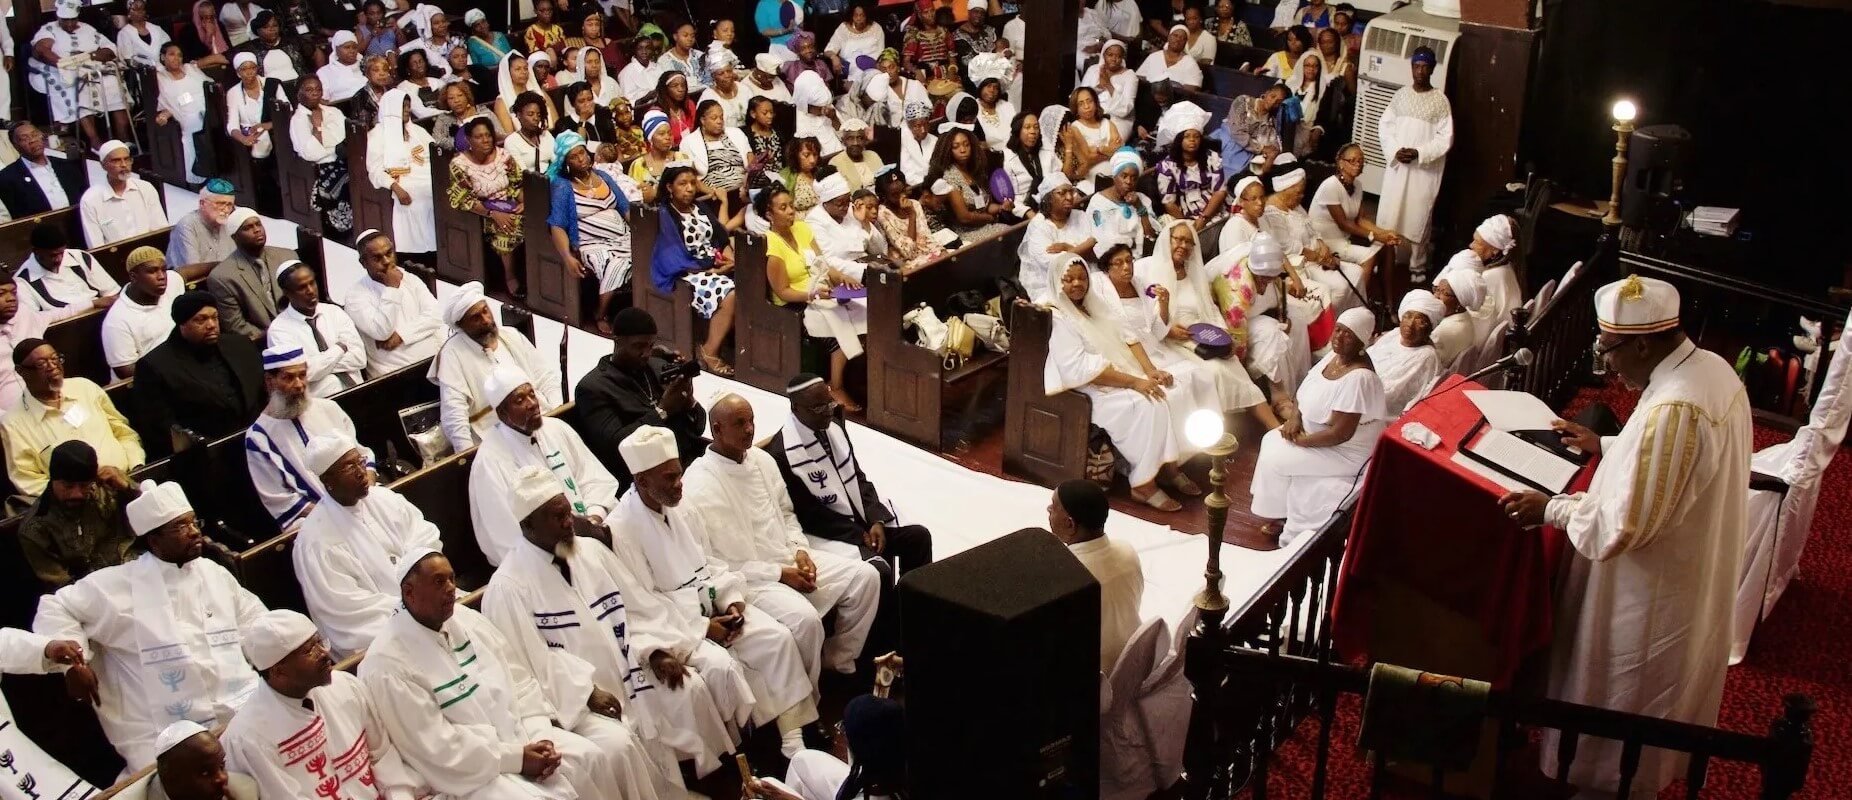 Congregants and clergy crowd the sanctuary of B'nai Adath Kol Beth Yisrael, an Israelite synagogue in Brooklyn, New York.